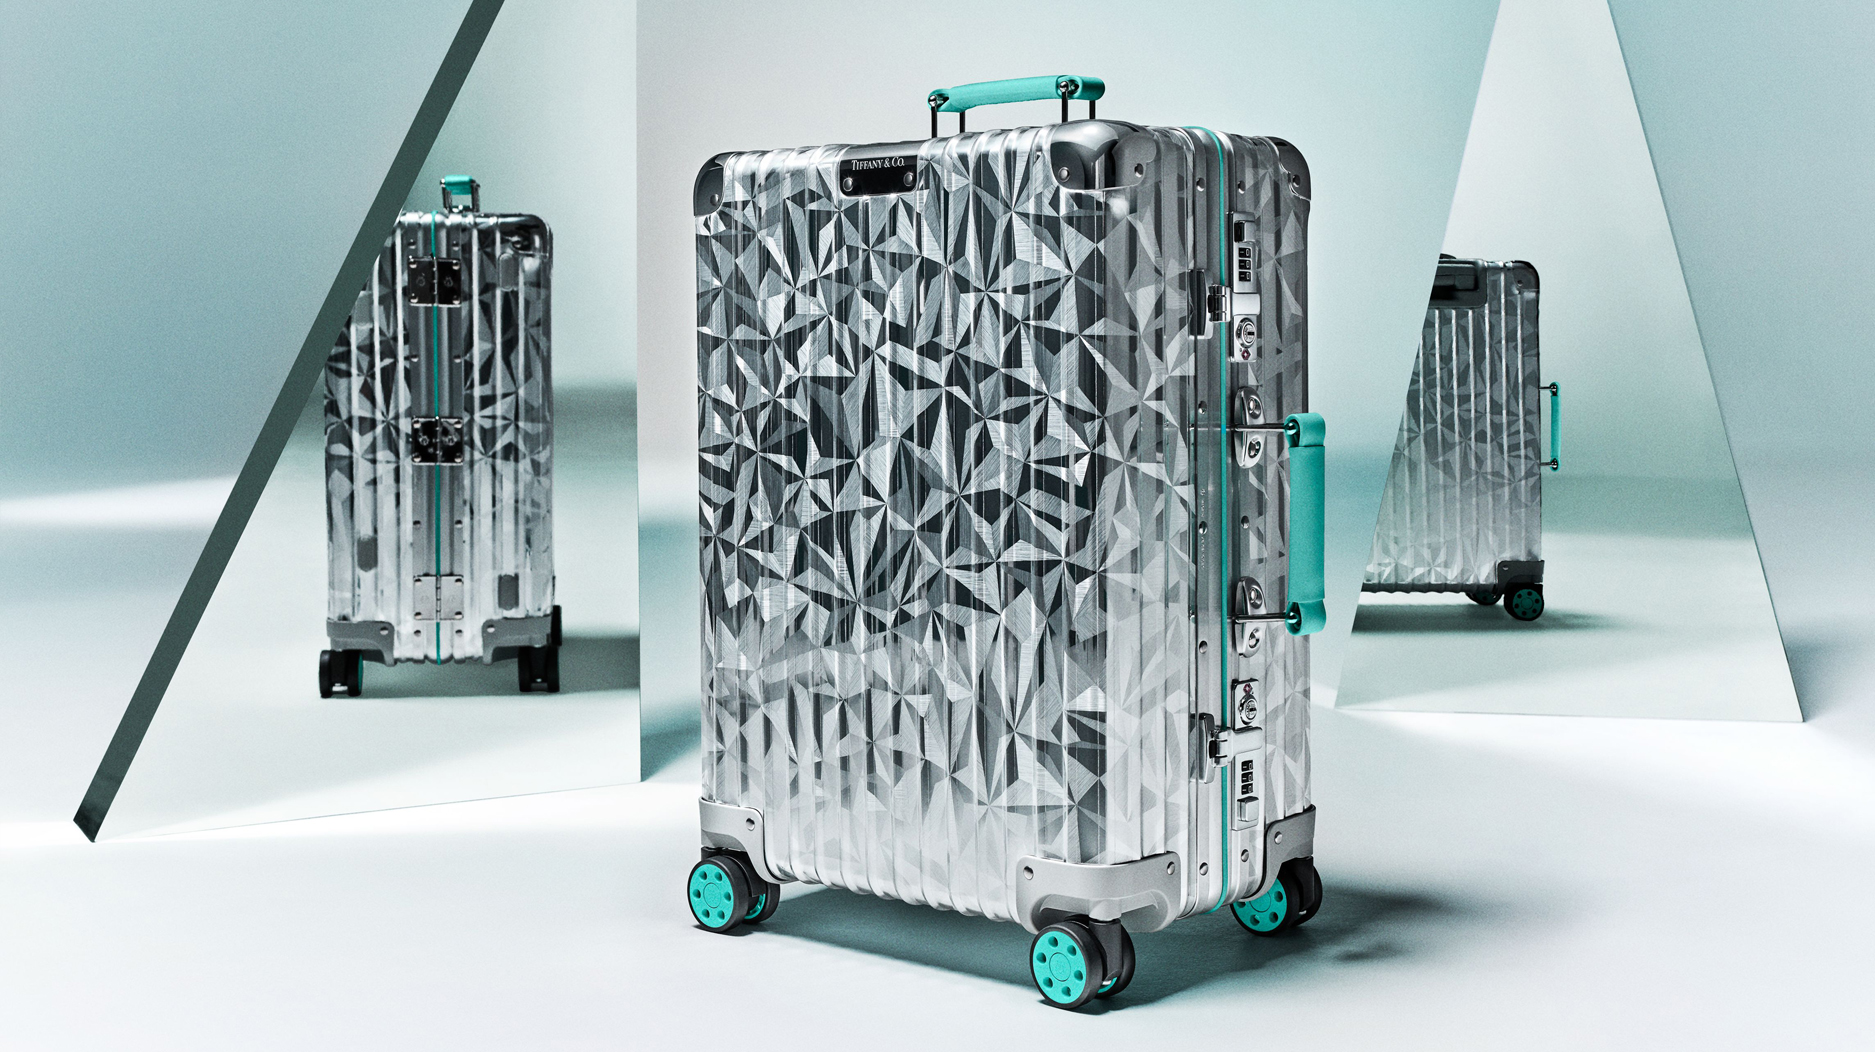 Rimowa joins the LVMH family